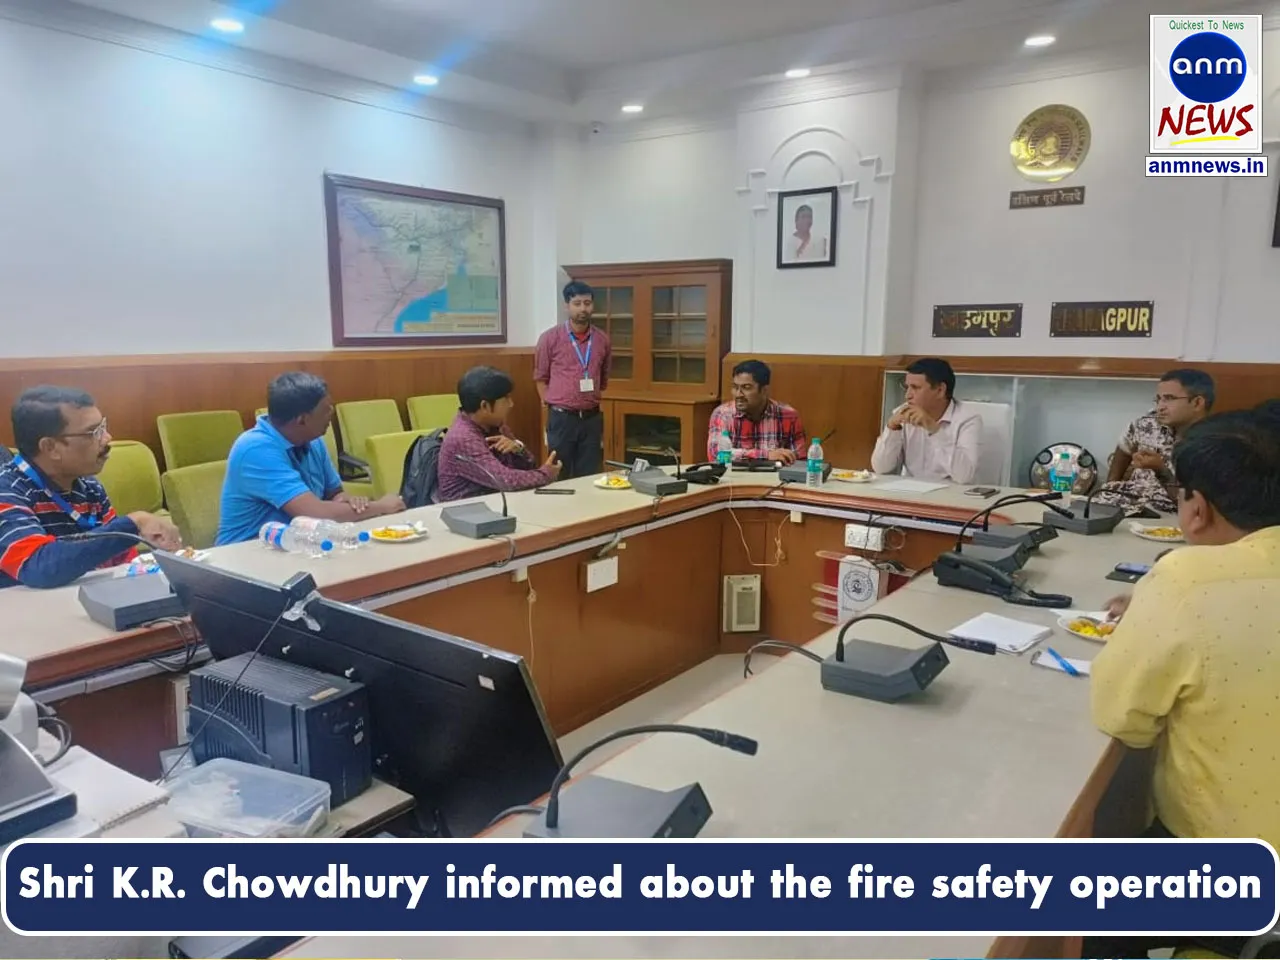 Shri K.R. Chowdhury informed about the fire safety operation